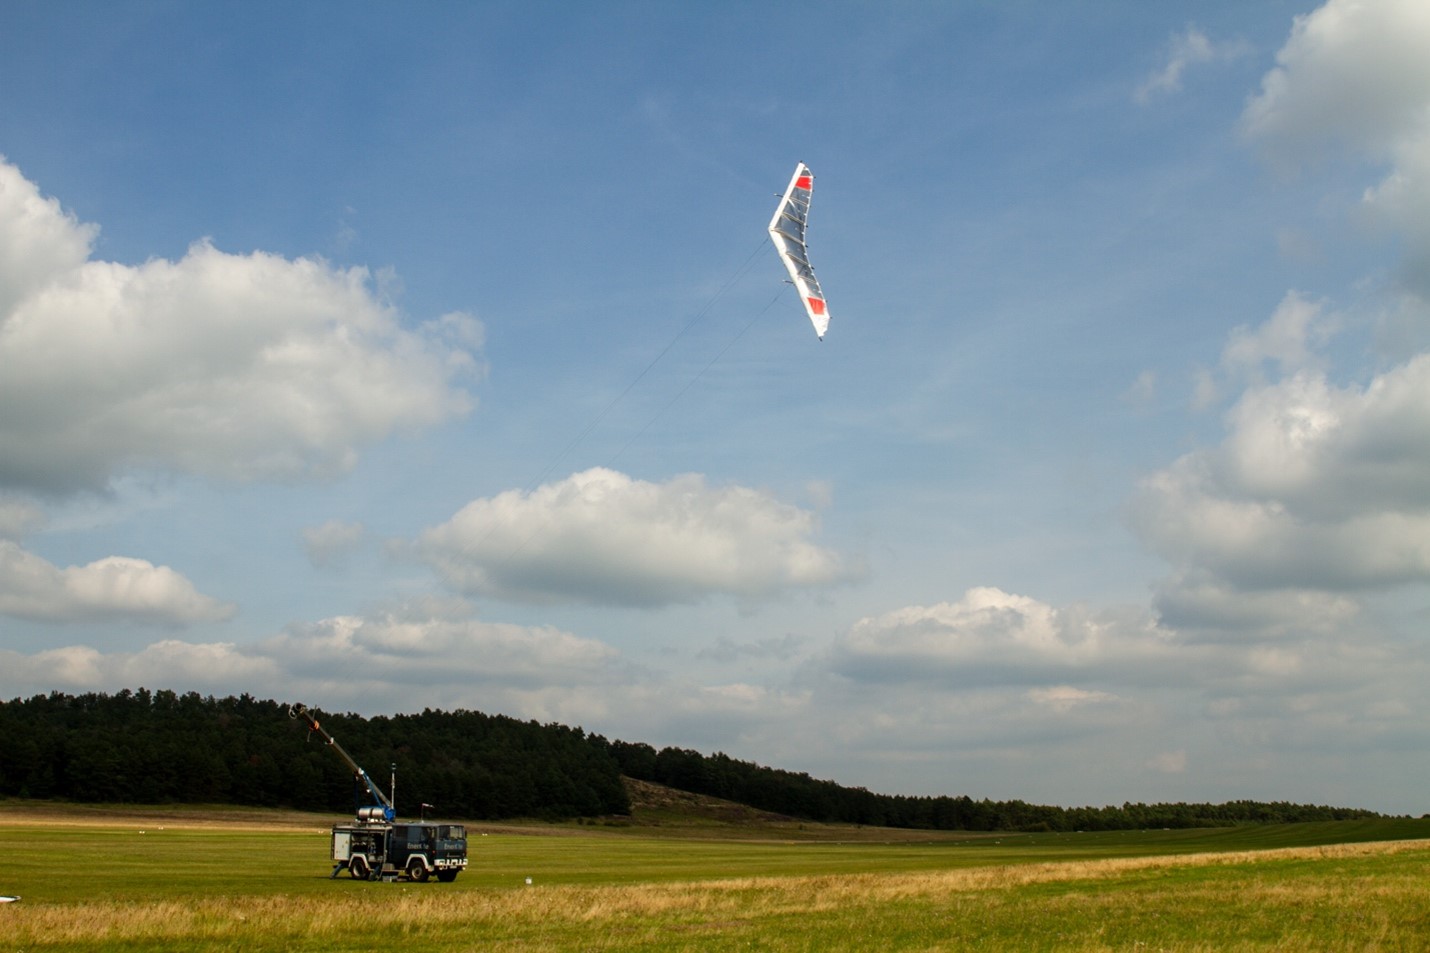 To make the most of wind power, go fly a kite